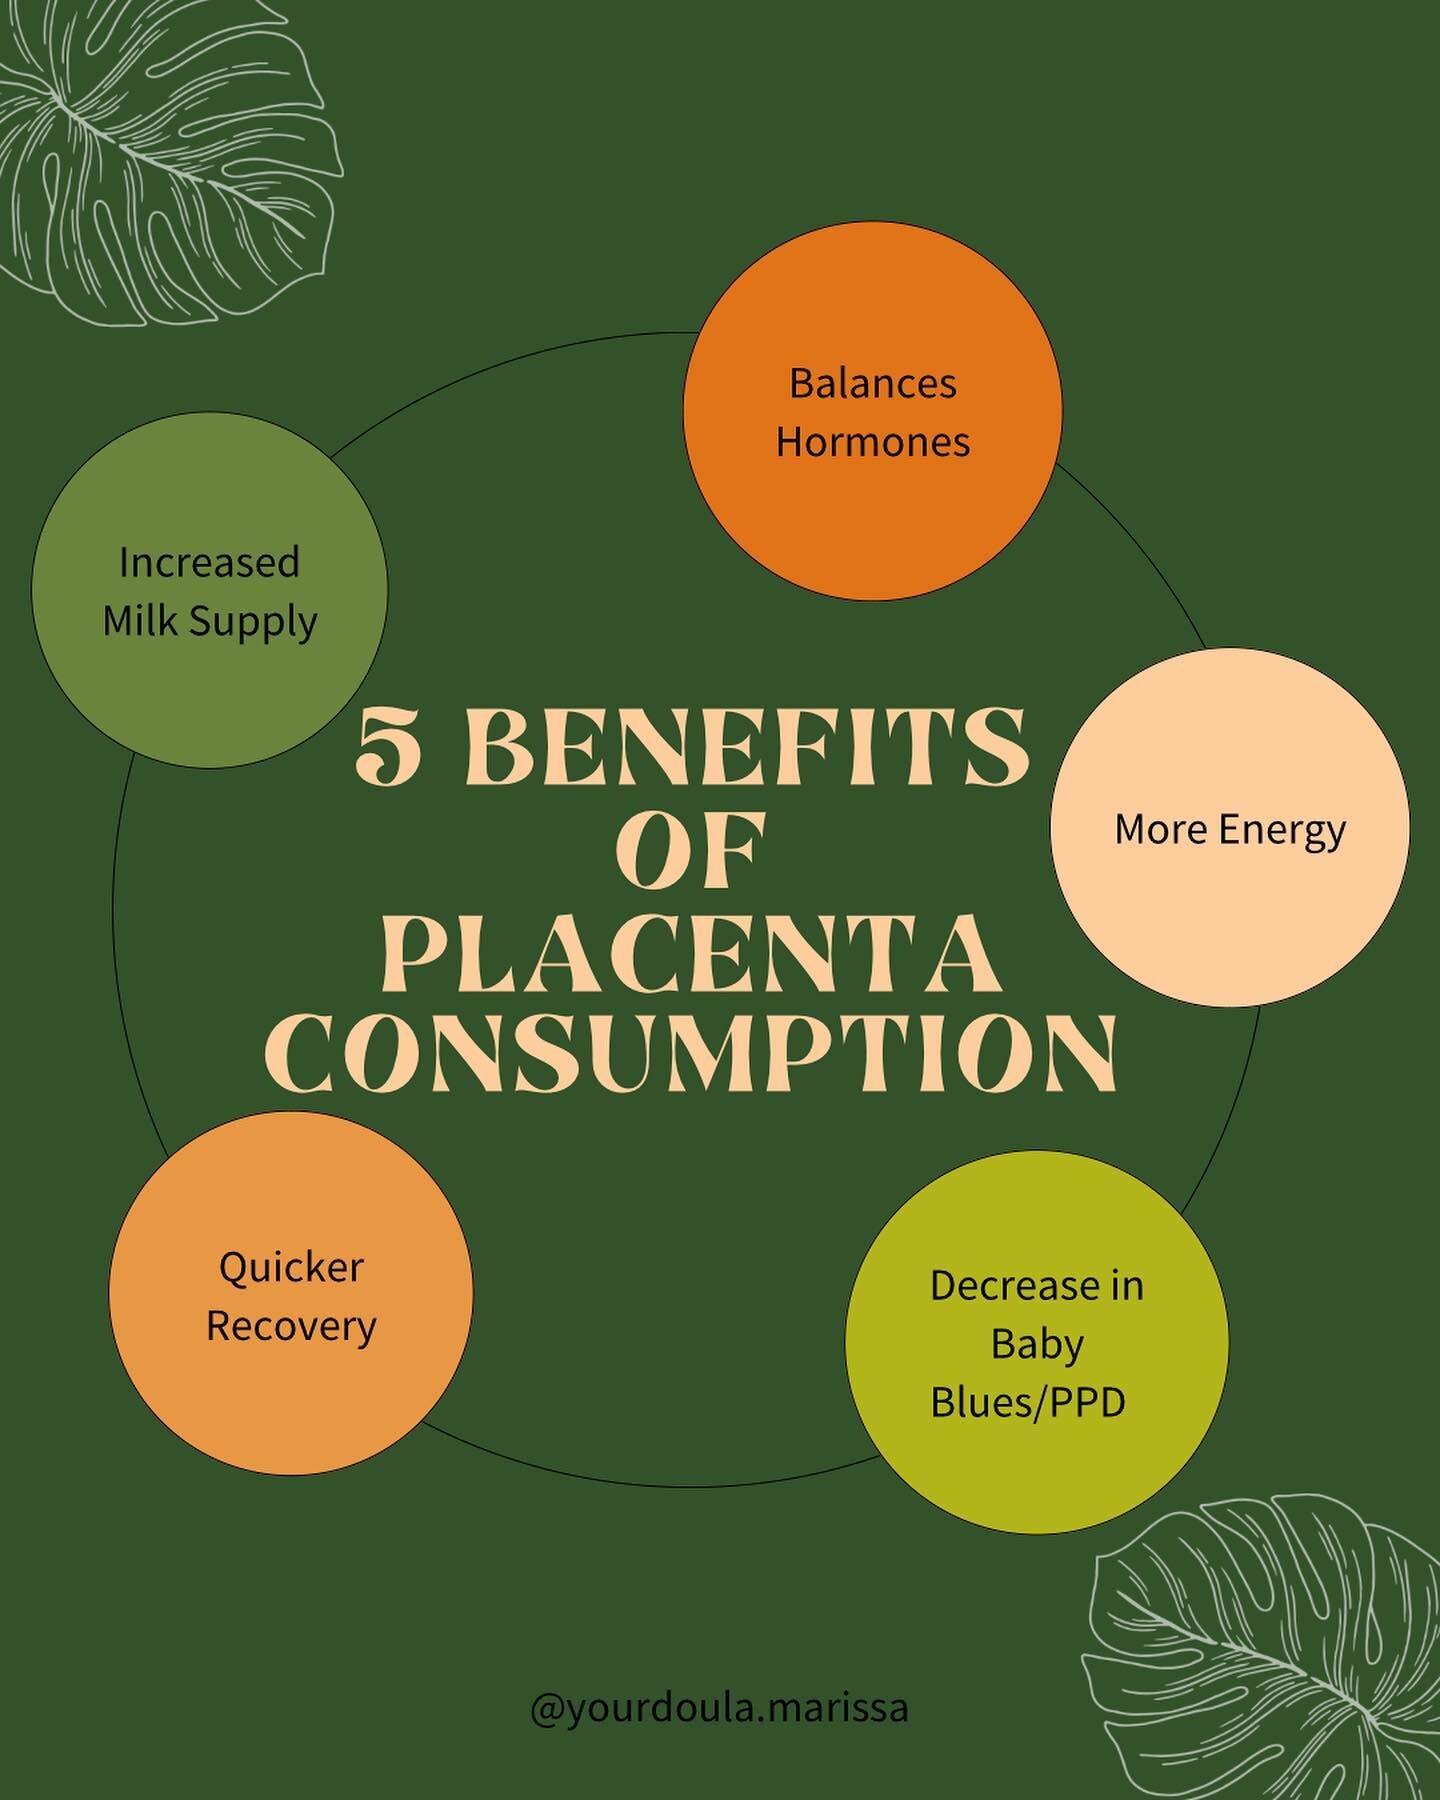 Placenta Encapsulation is postpartum care!! 

💊 Vitamin B6
💊 Vitamin B12 
💊 Iron
💊 Estrogen and Progesterone 

These are some of the vitamins, minerals and hormones that can be found in the placenta. 

After you give birth to your baby and placen